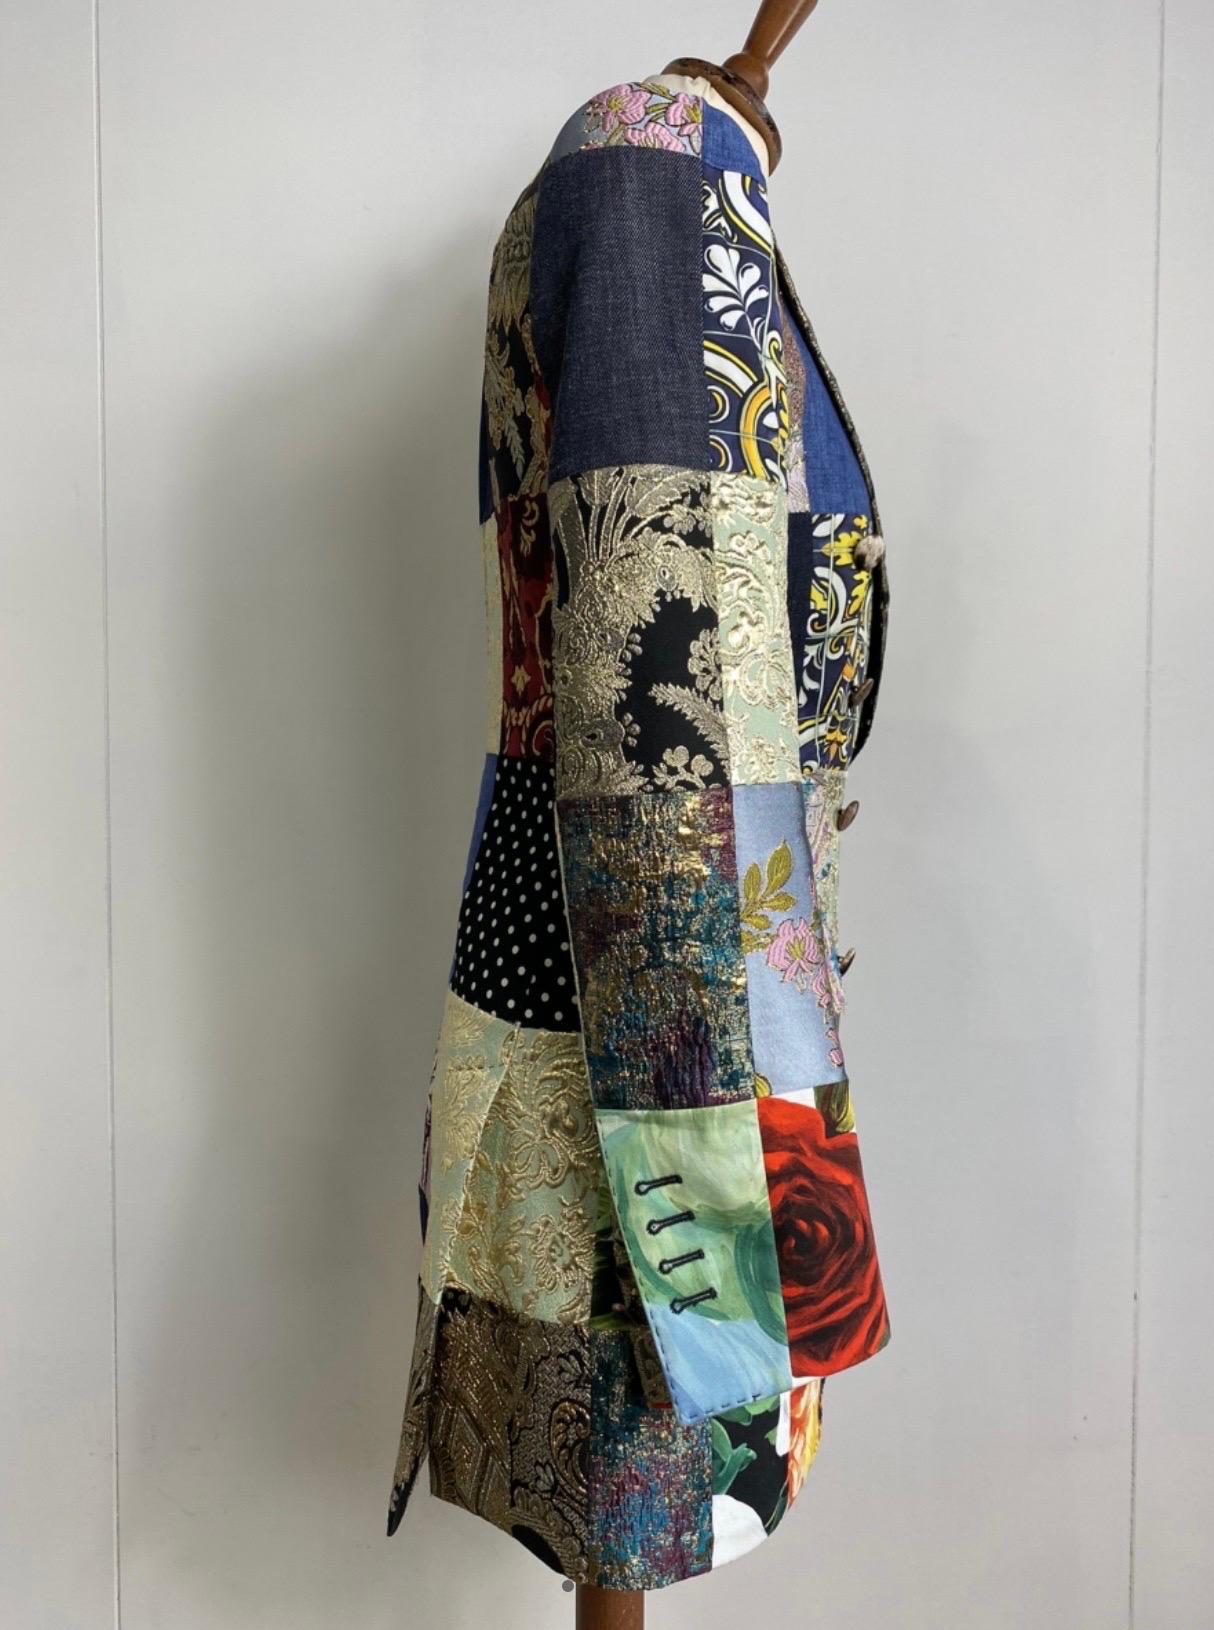 Dolce & Gabbana patchwork jacket.
Spring 2021 fashion show.
Italian size 38, double-breasted closure.
the length is 76cm, shoulder 38cm, chest 38cm, sleeve 61cm, mixed material, see composition in the photo, in perfect condition.